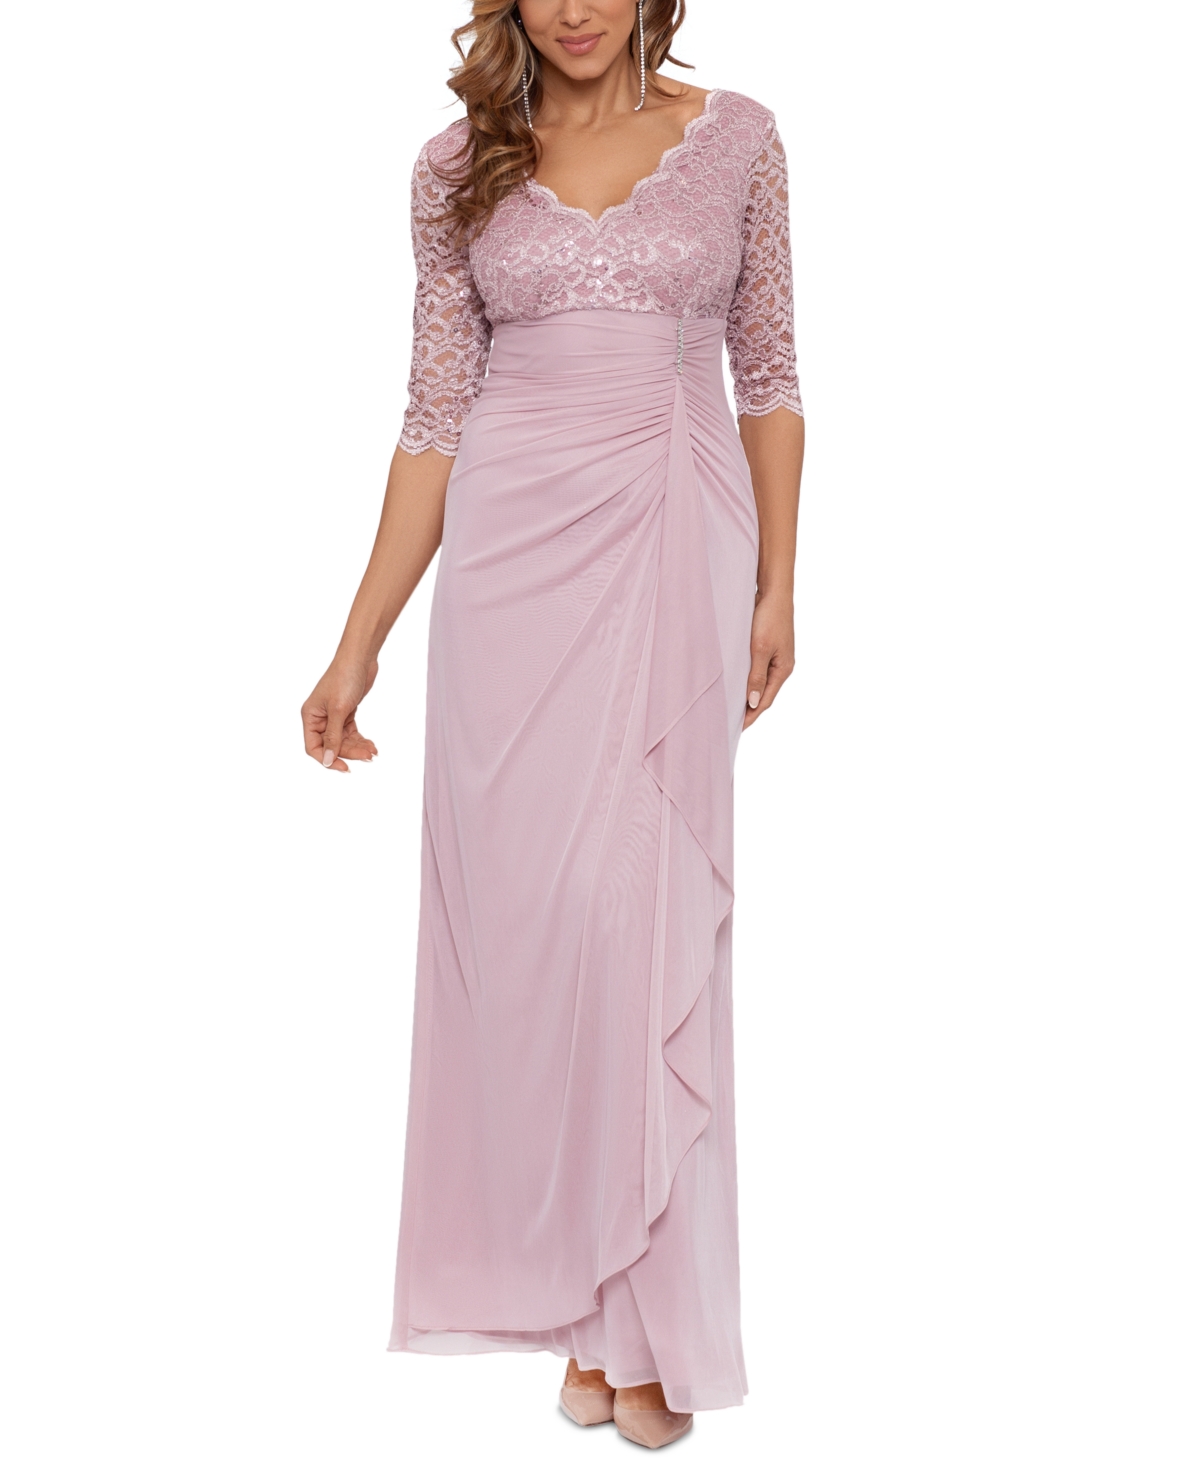 Women's Lace-Top Waterfall-Detail Gown - Rose